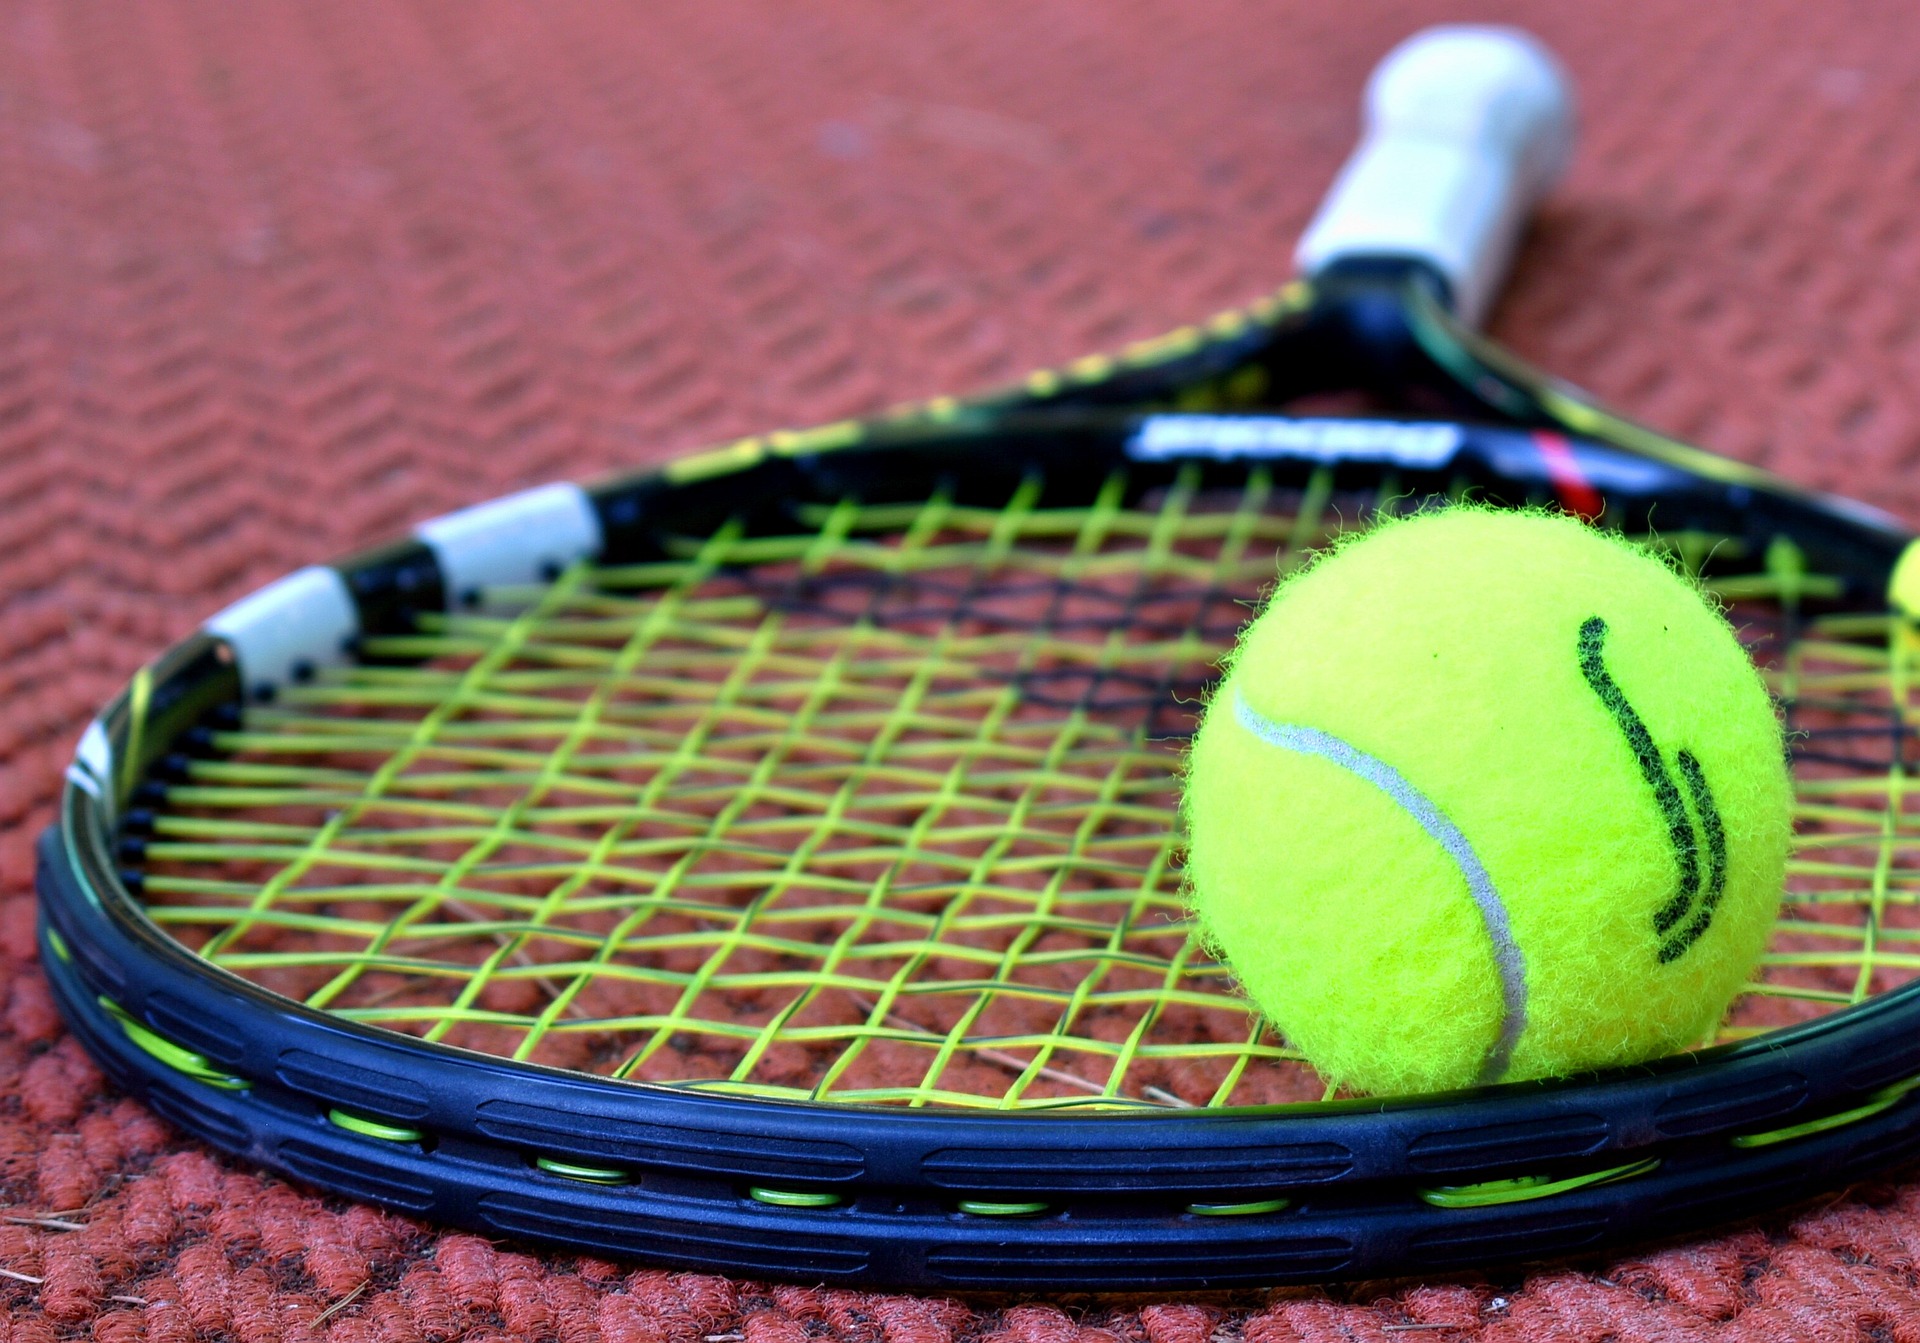 Interesting Facts About The Tennis